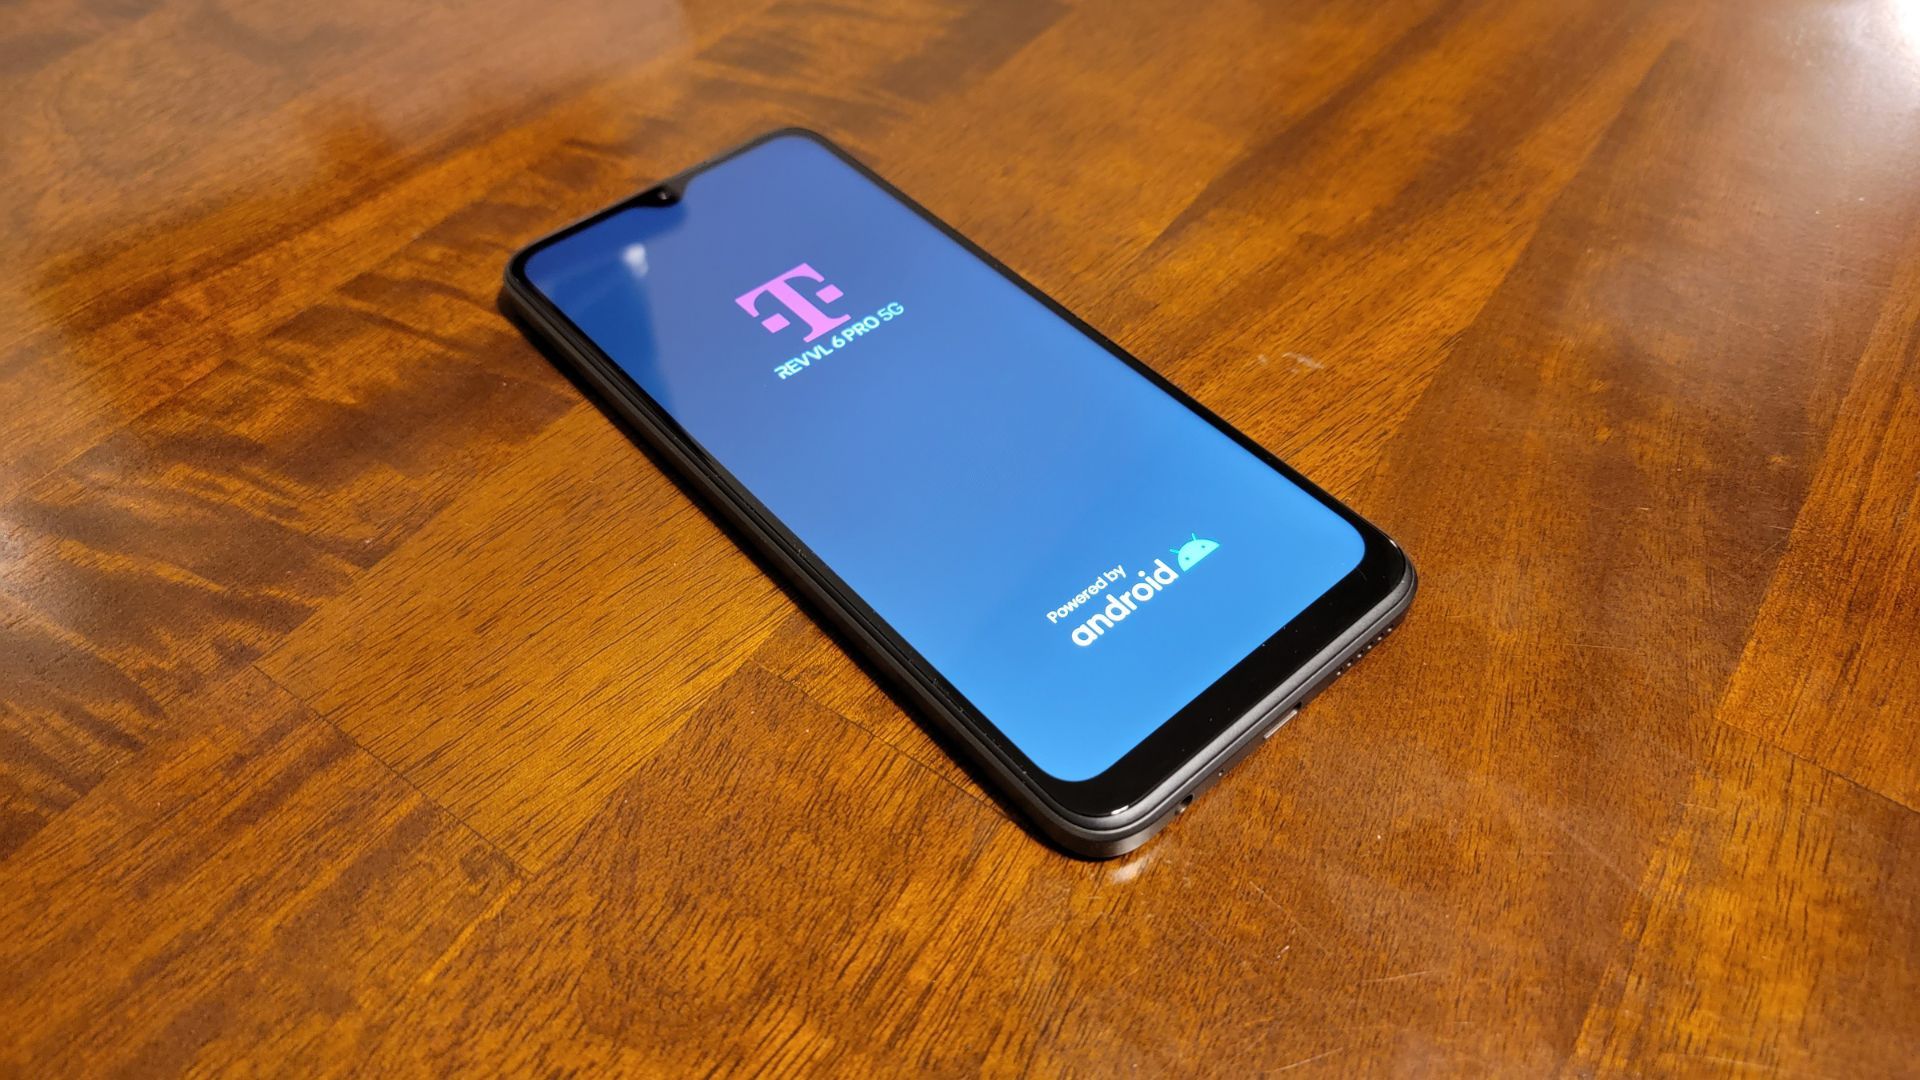 tmobile revvl 6 pro smartphone starting up and showing the android logo